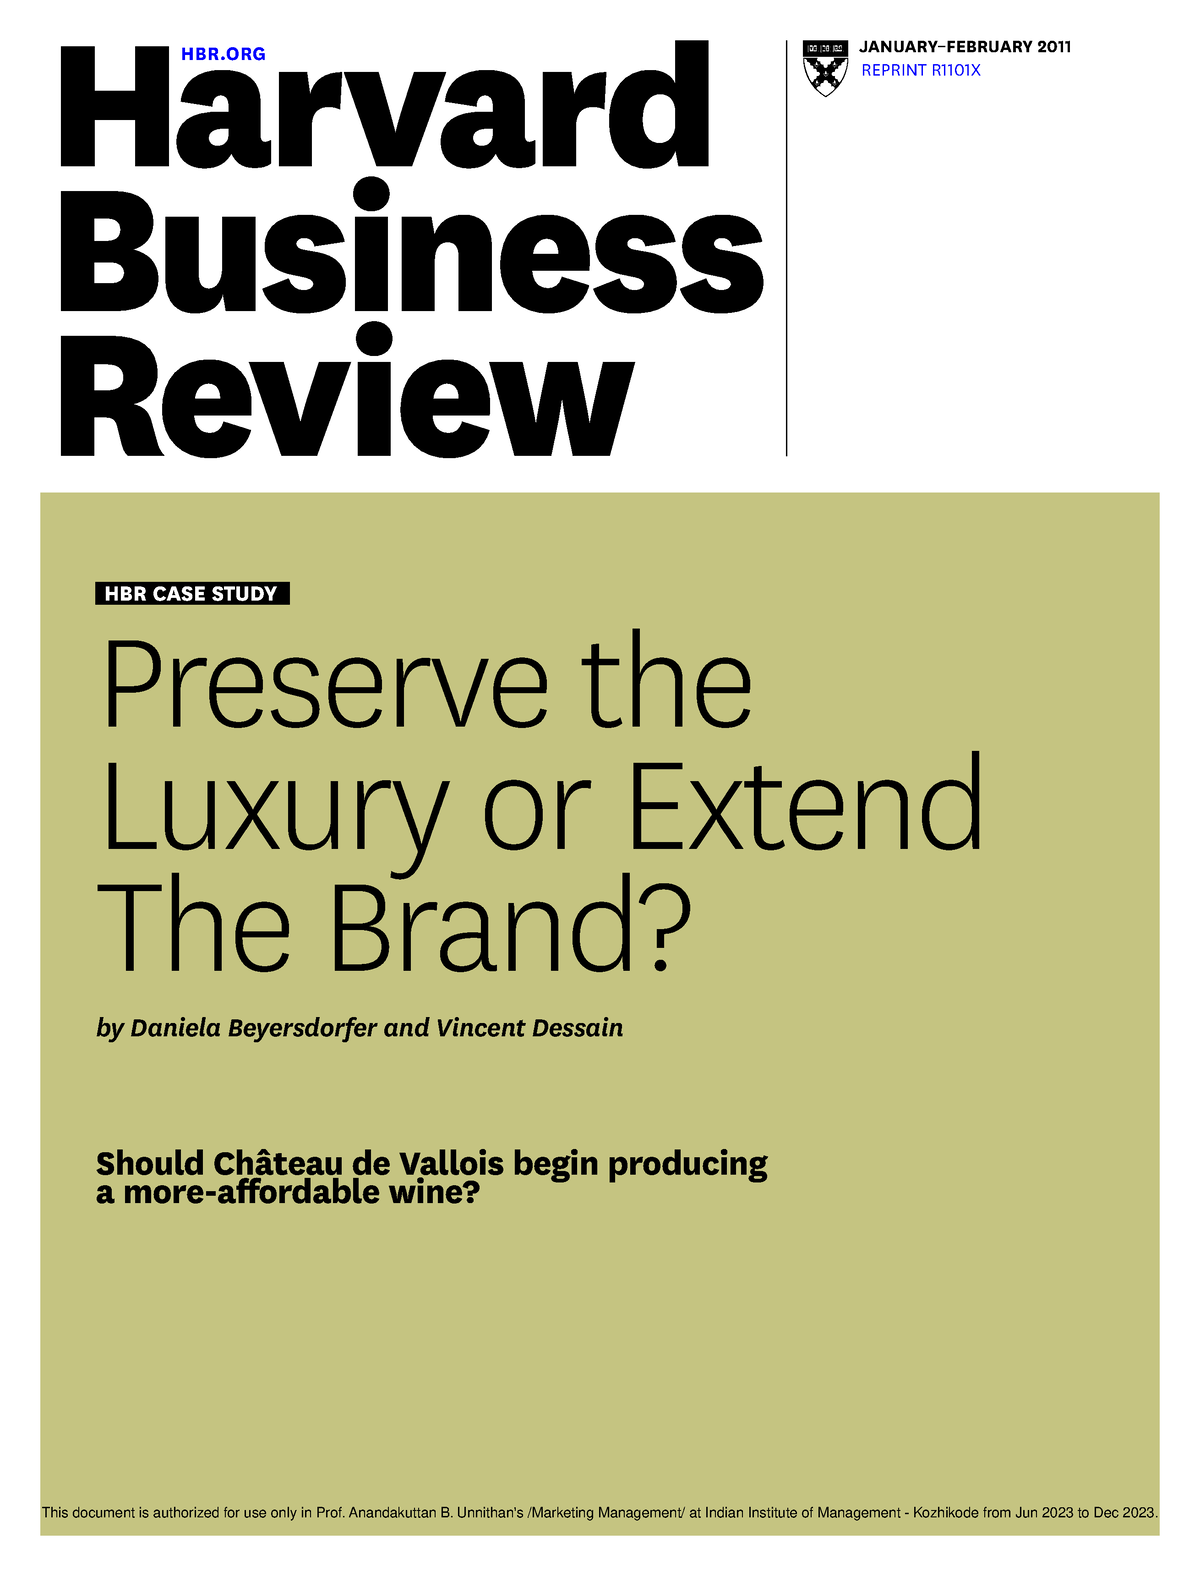 hbr case study preserve the luxury or extend the brand